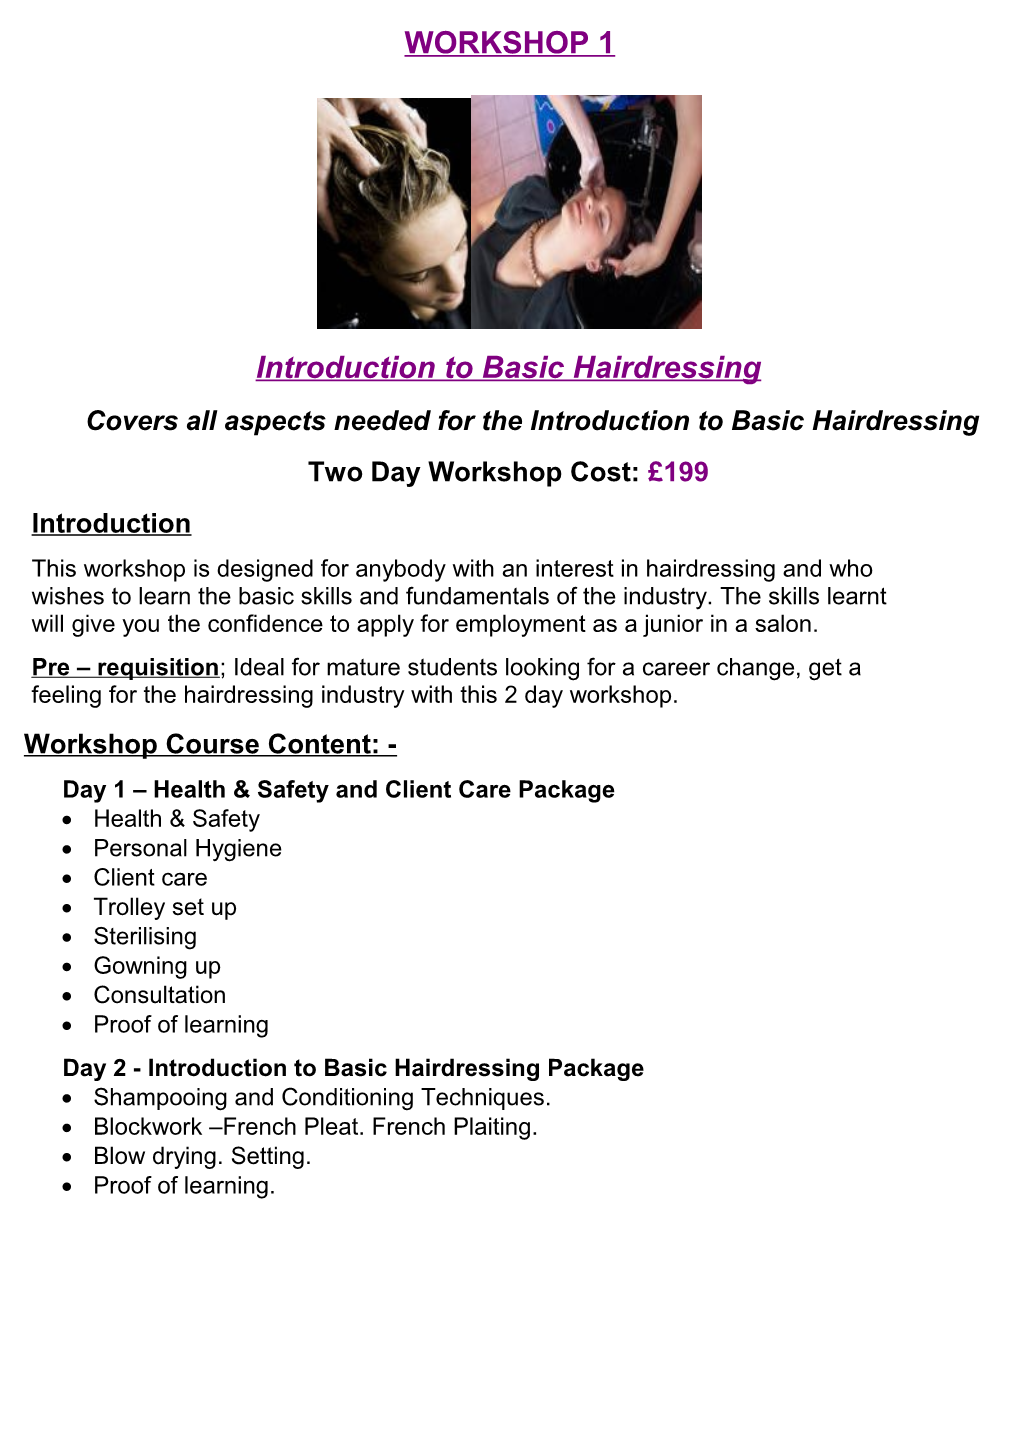 Introduction to Basic Hairdressing